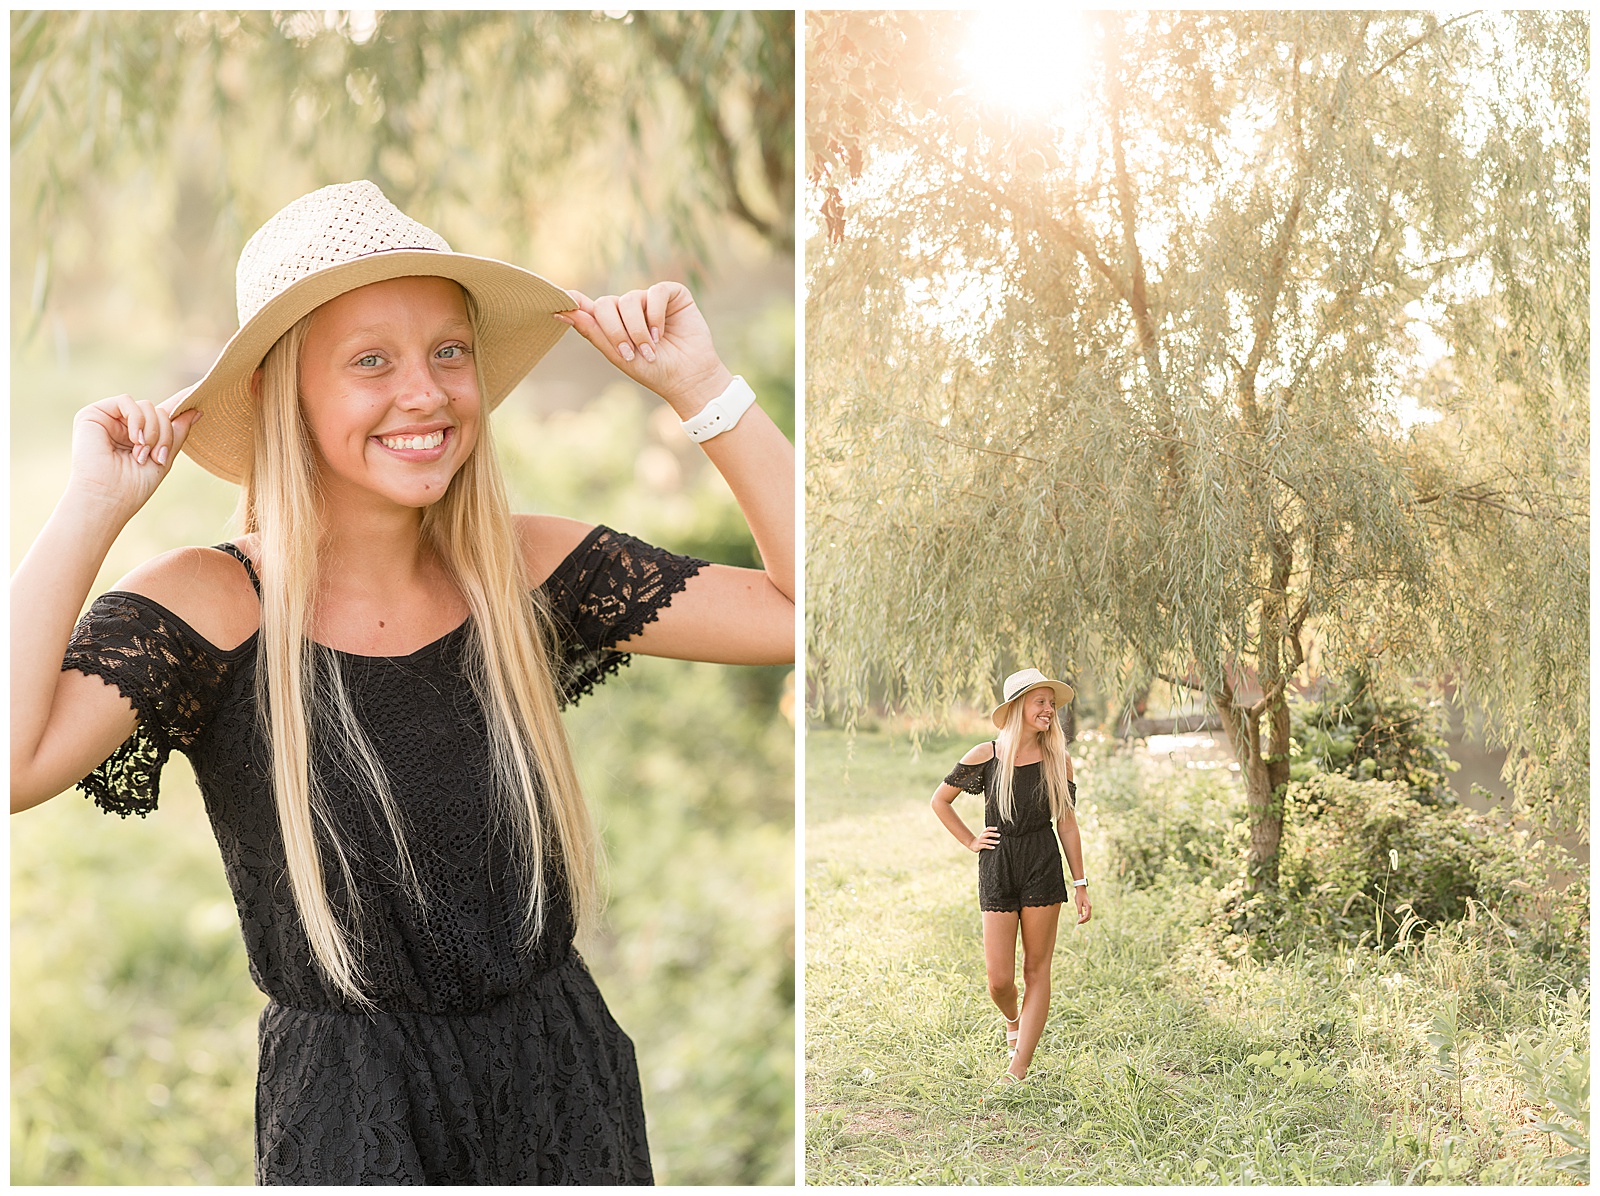 senior girl tips her hat as she smiles at camera on sunny summer evening by willow tree